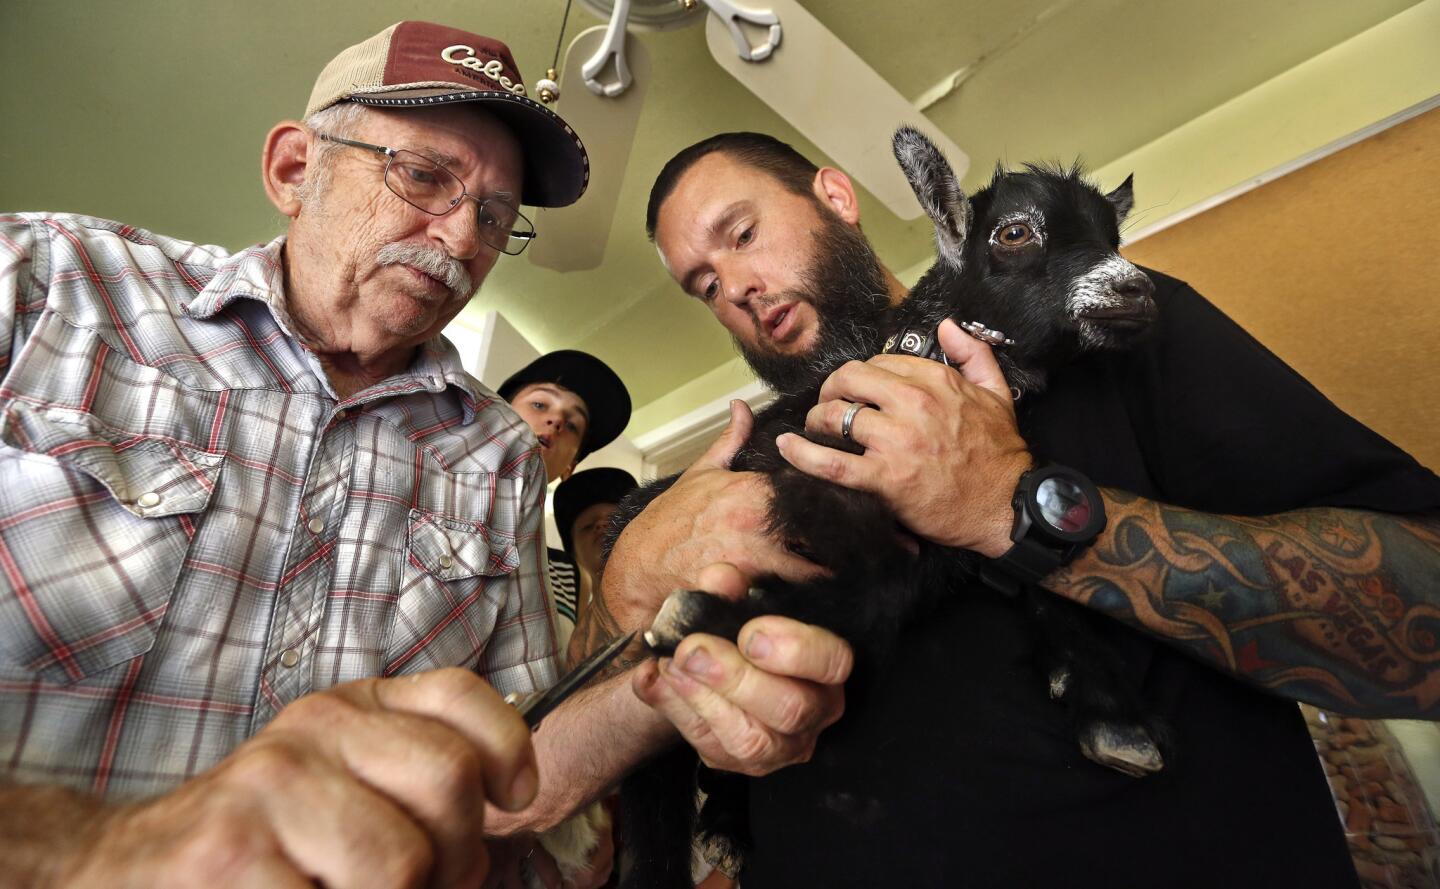 Jim Hosley, left, co-owner of Amber Waves farm in Norco, Calif., clips the hooves of Charles, a 7-week-old African pygmy goat being held by its owner, Matthew Smith of Norco.